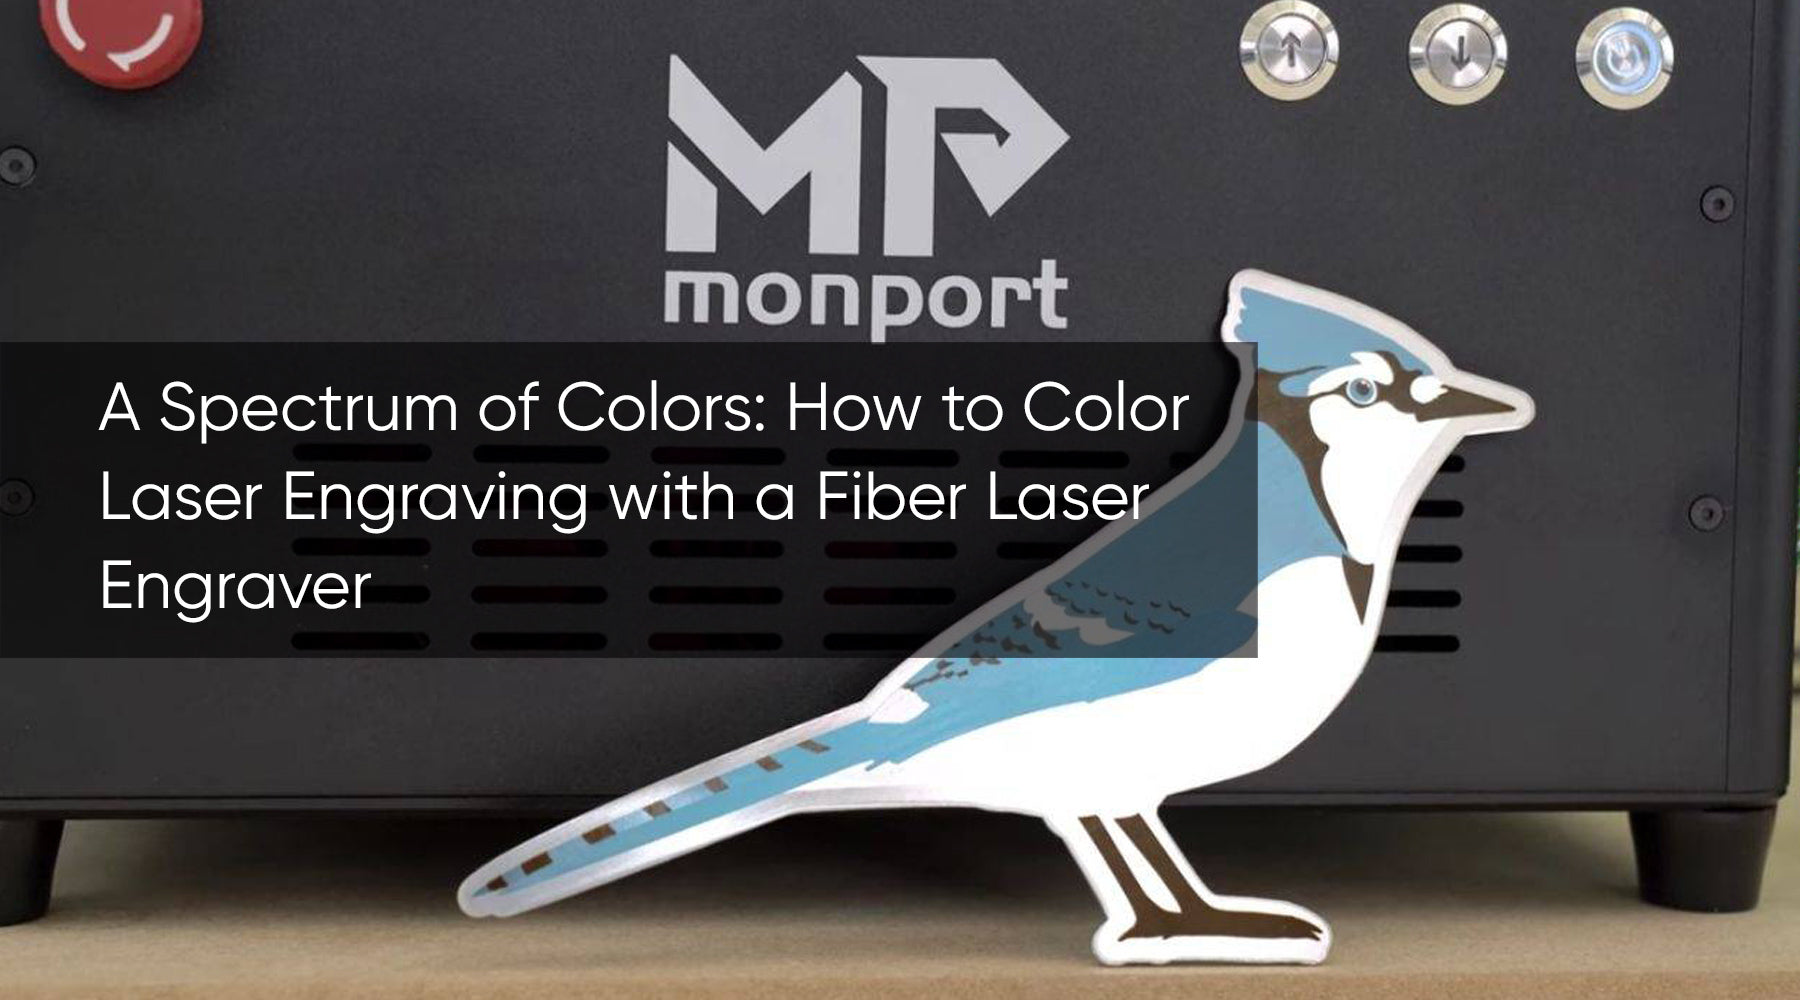 A Spectrum of Colors: How to Color Laser Engraving with a Fiber Laser Engraver